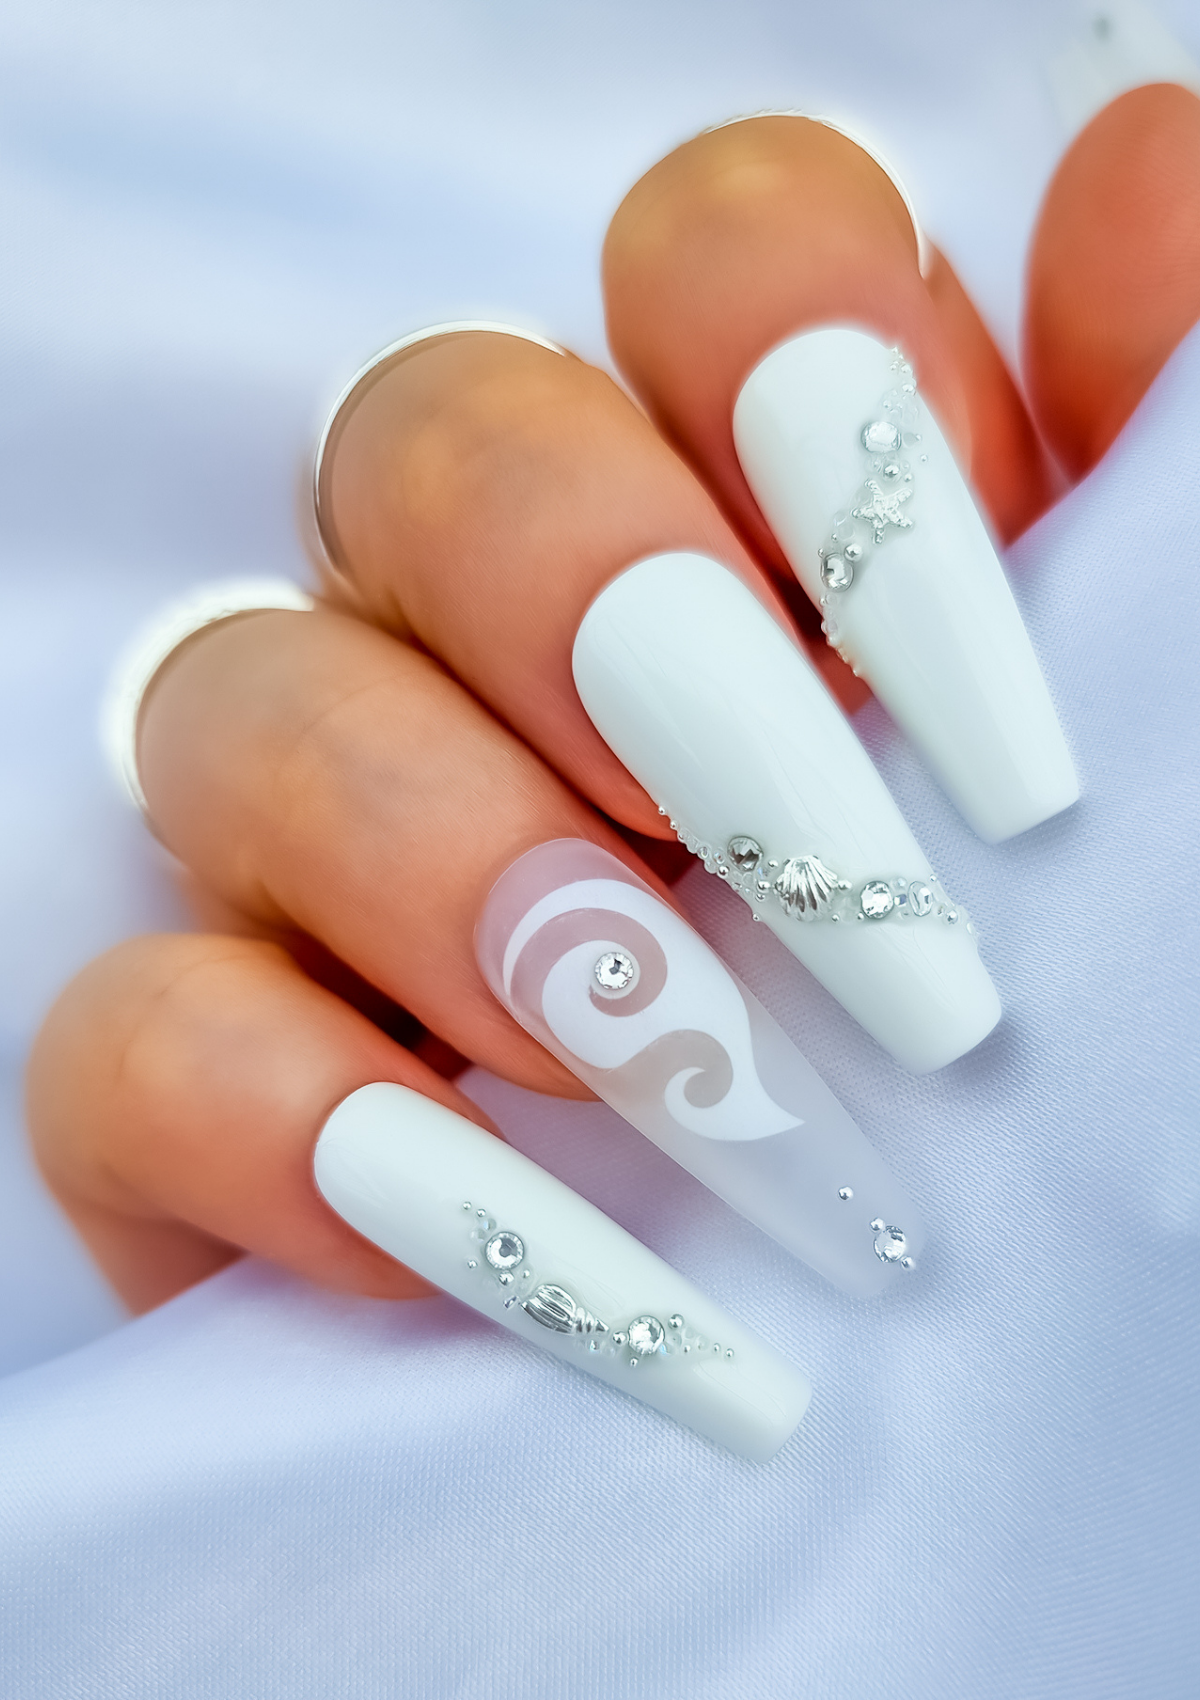 White nails with hei matau nail decal on ring finger and silver sea themed crystal design